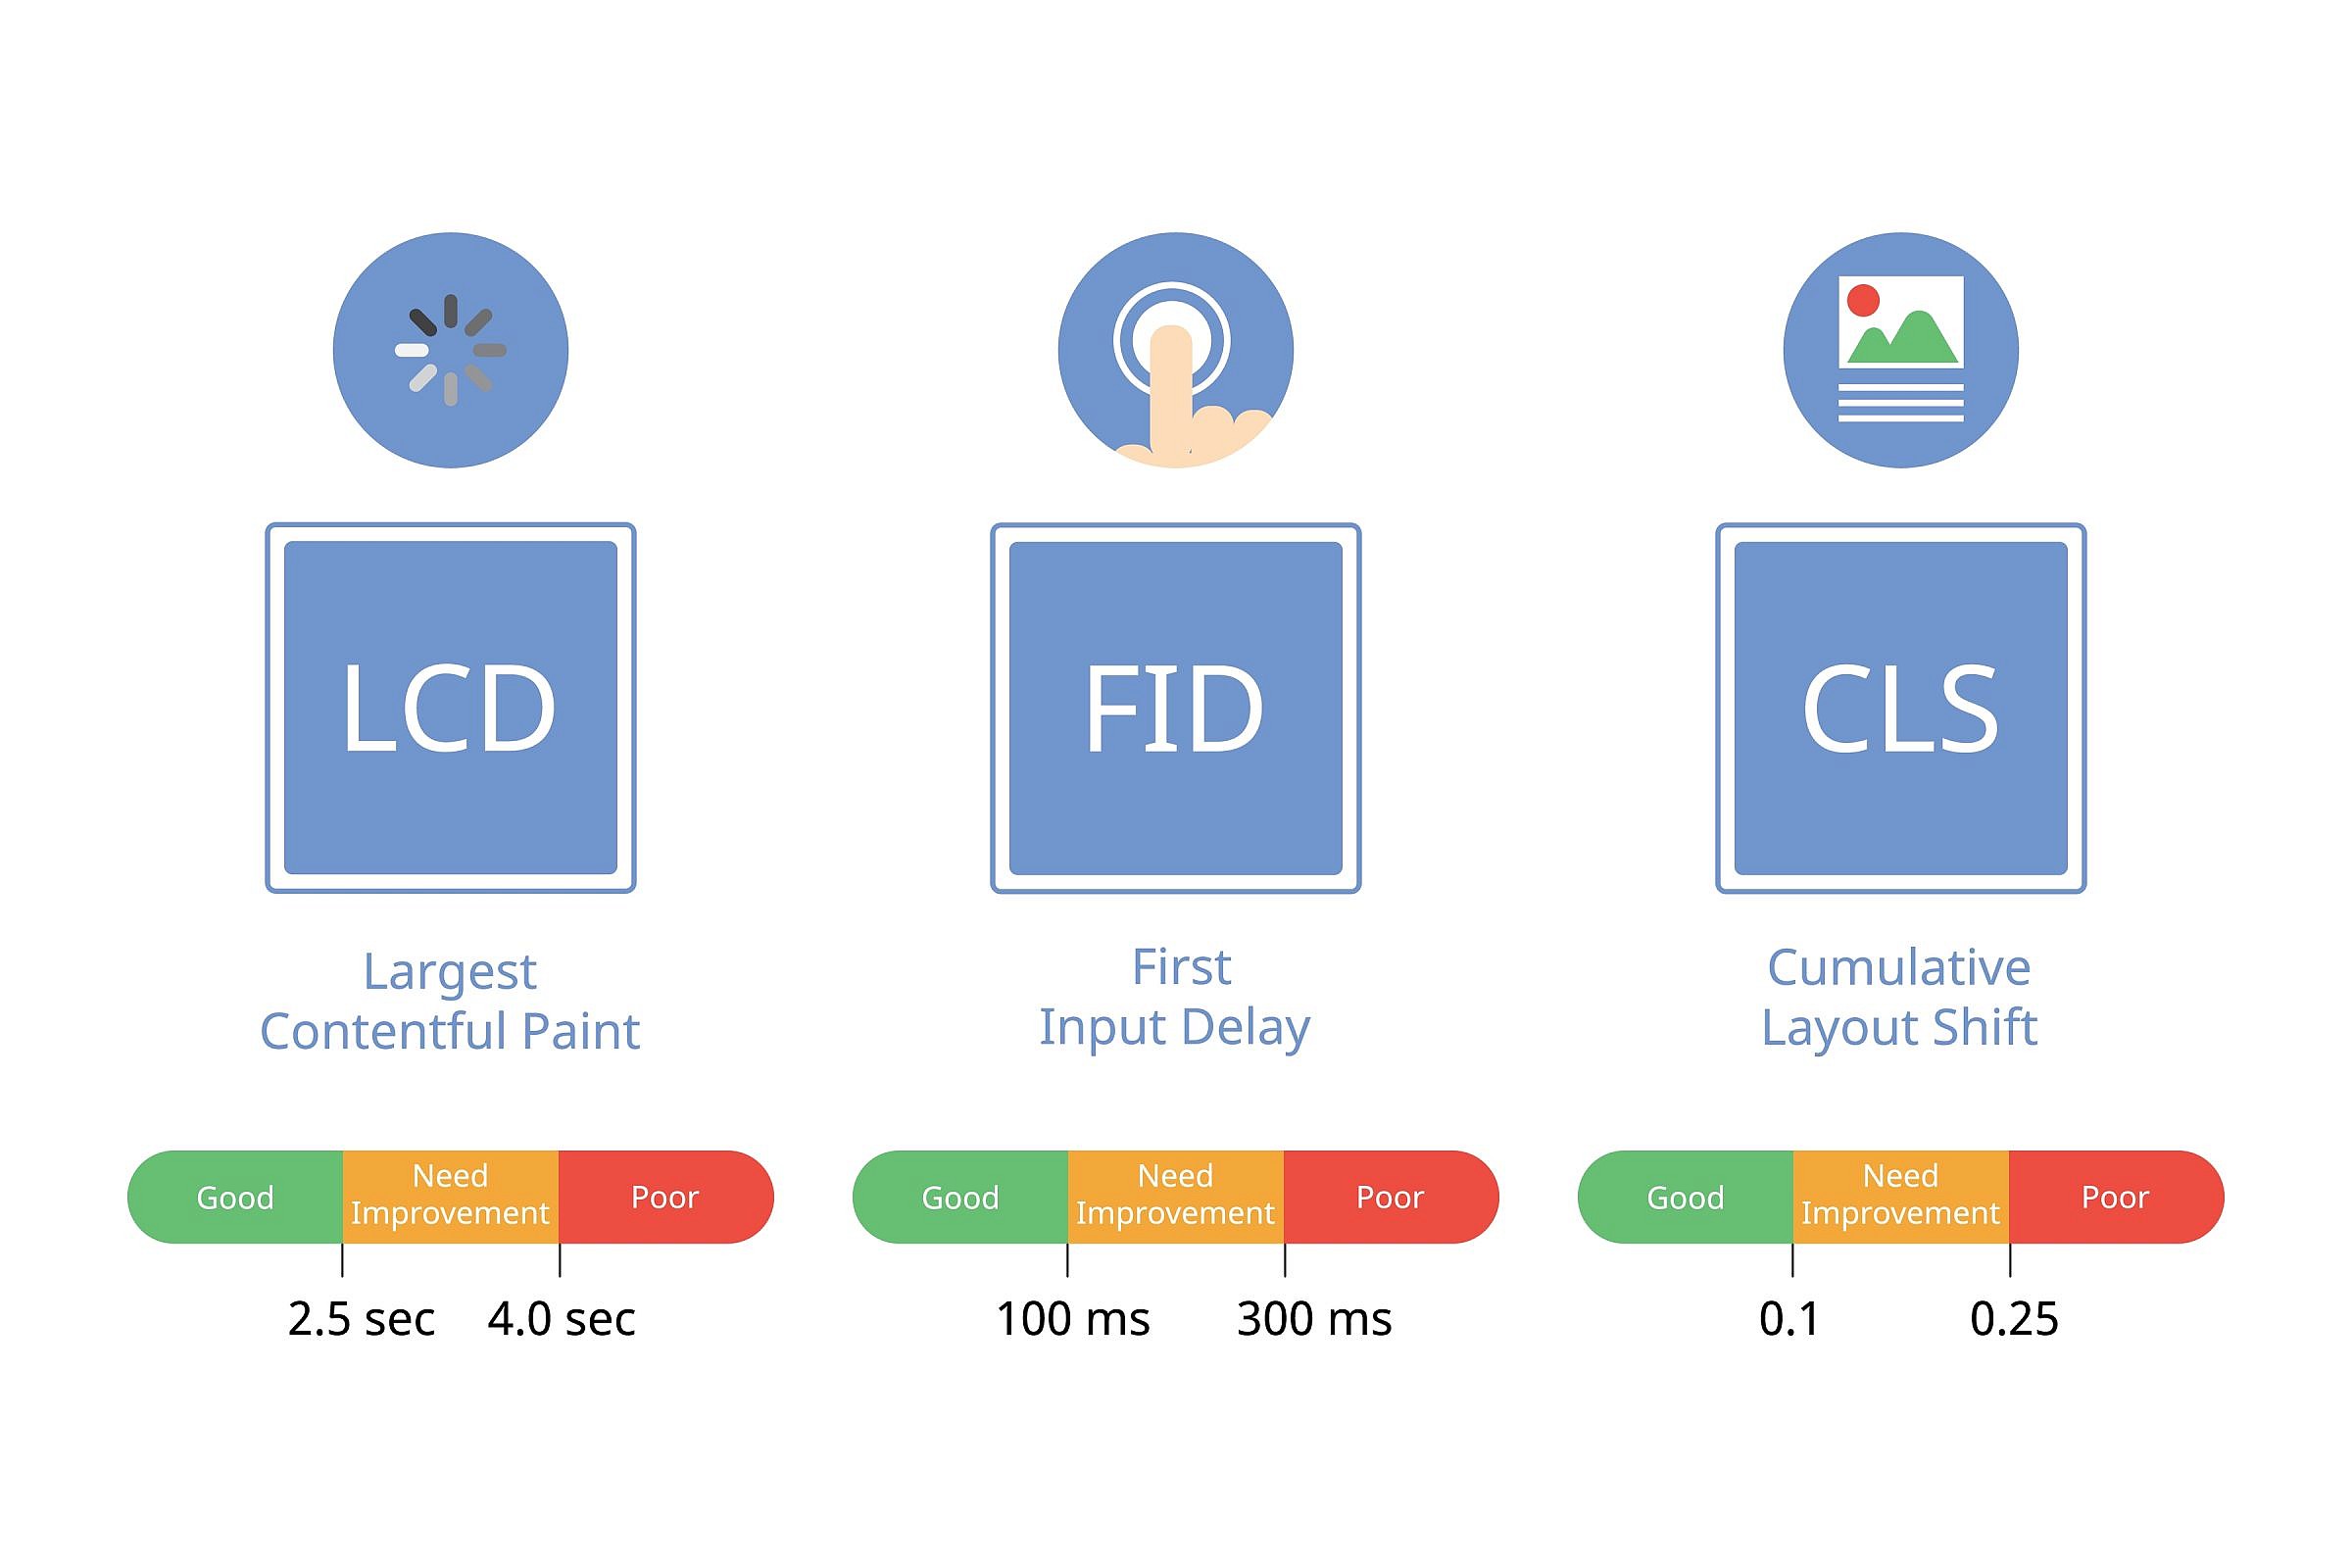 LCD, FID and CLS: Google's Core Web Vitals